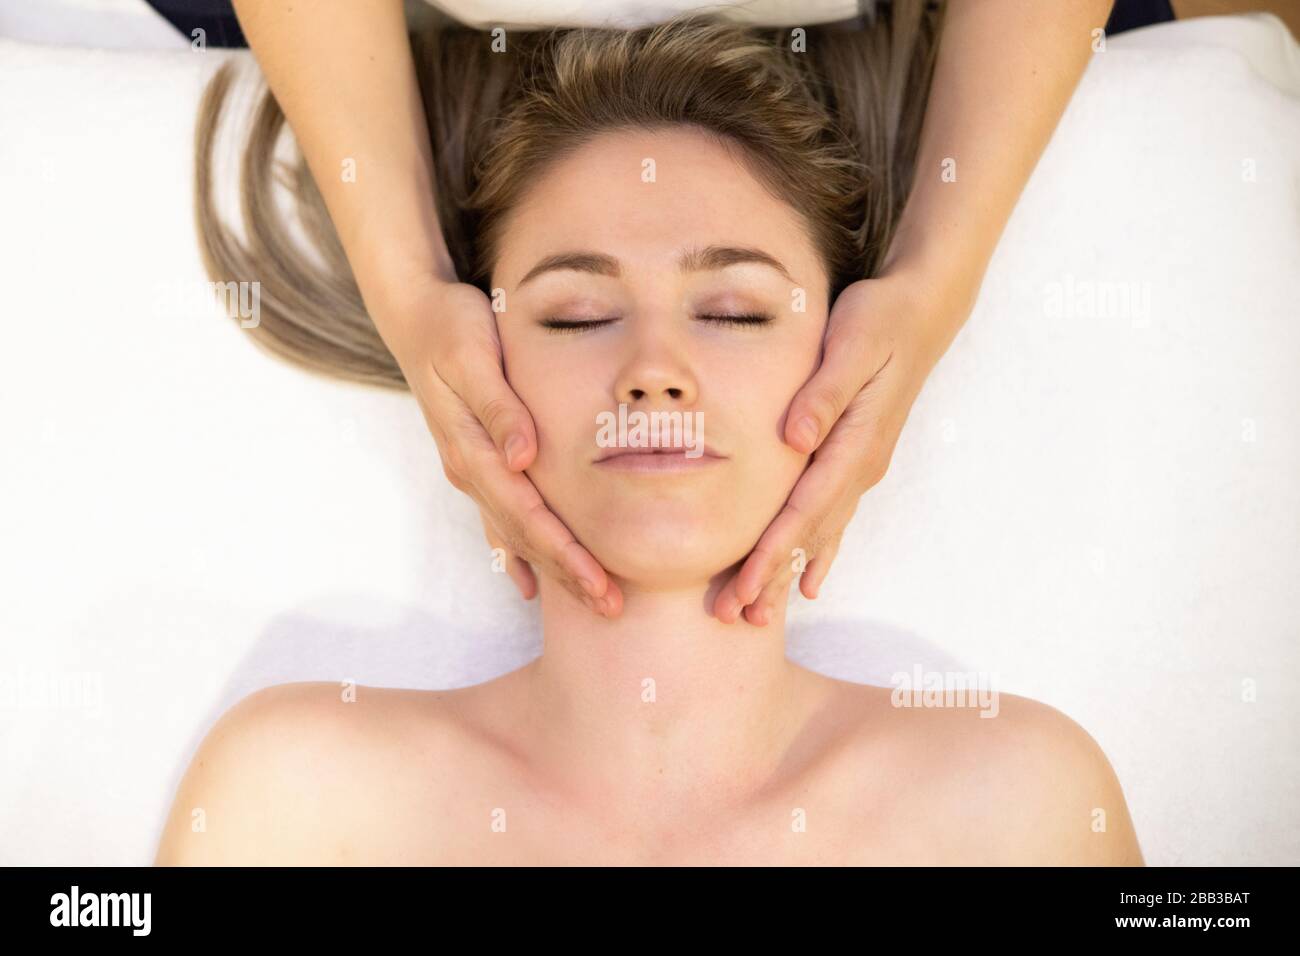 Young blond woman receiving a head massage in a spa center. Stock Photo